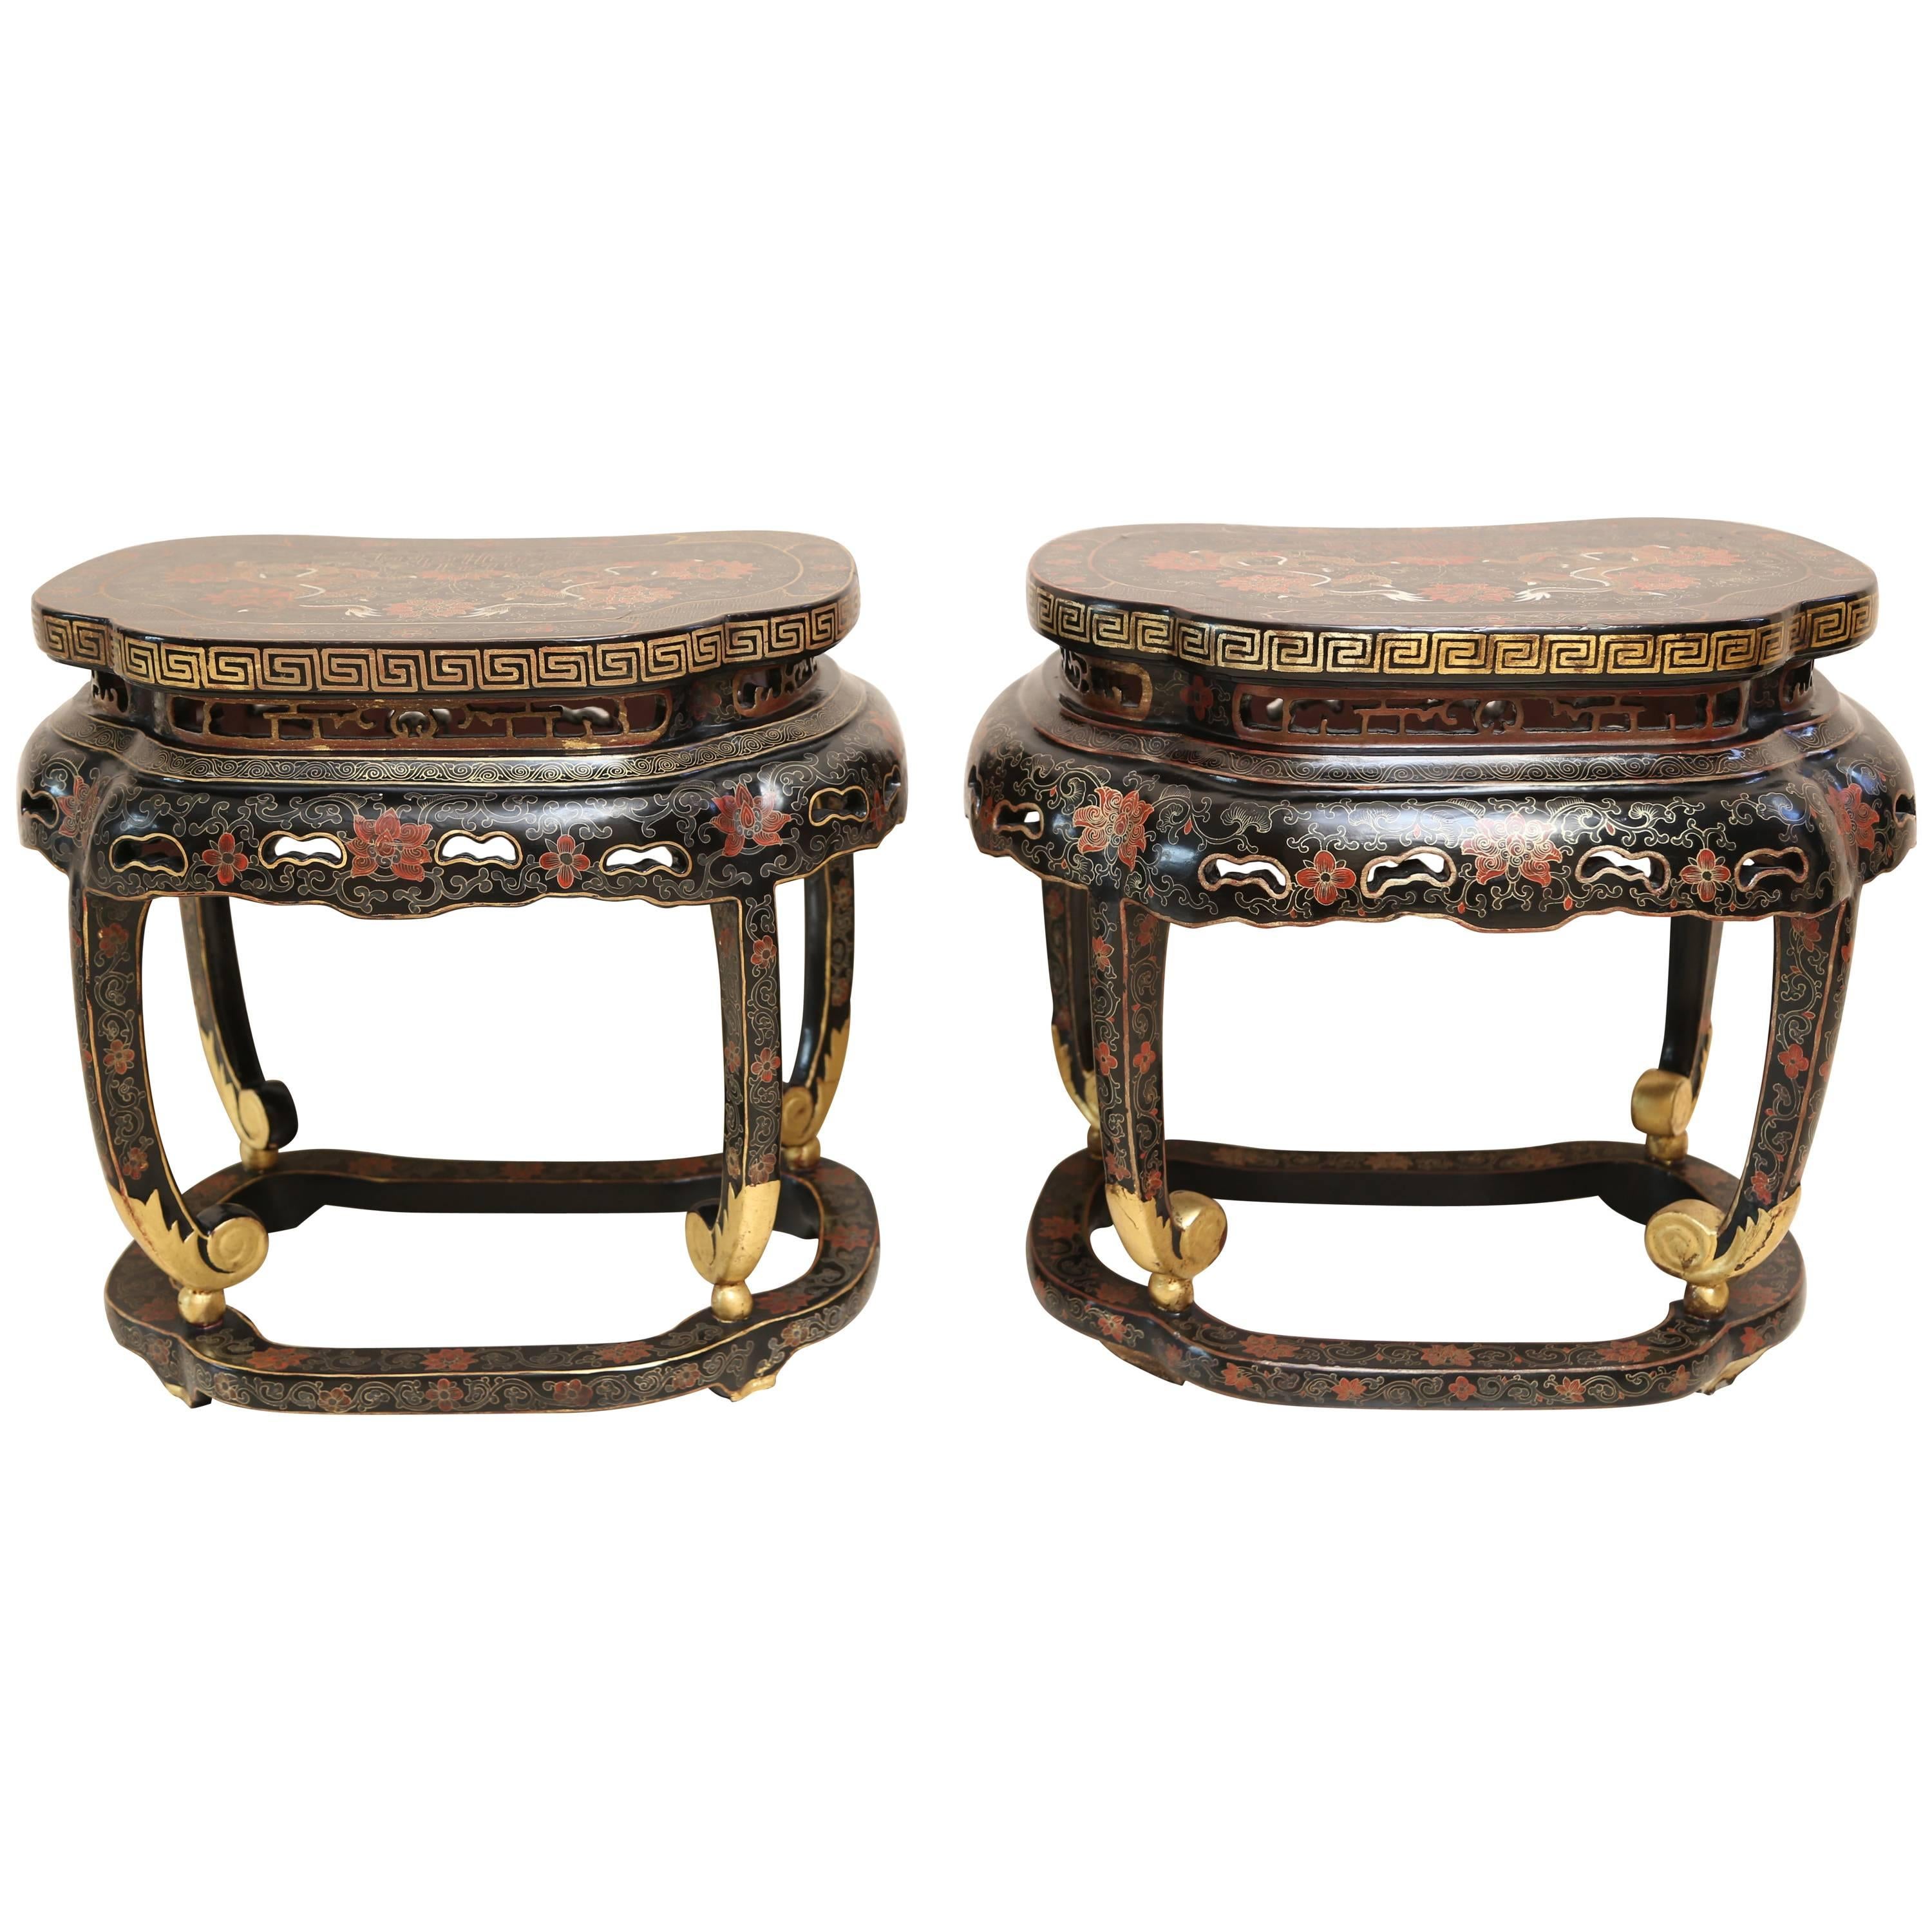 Pair of Chinese Black and Gilt Low Tables